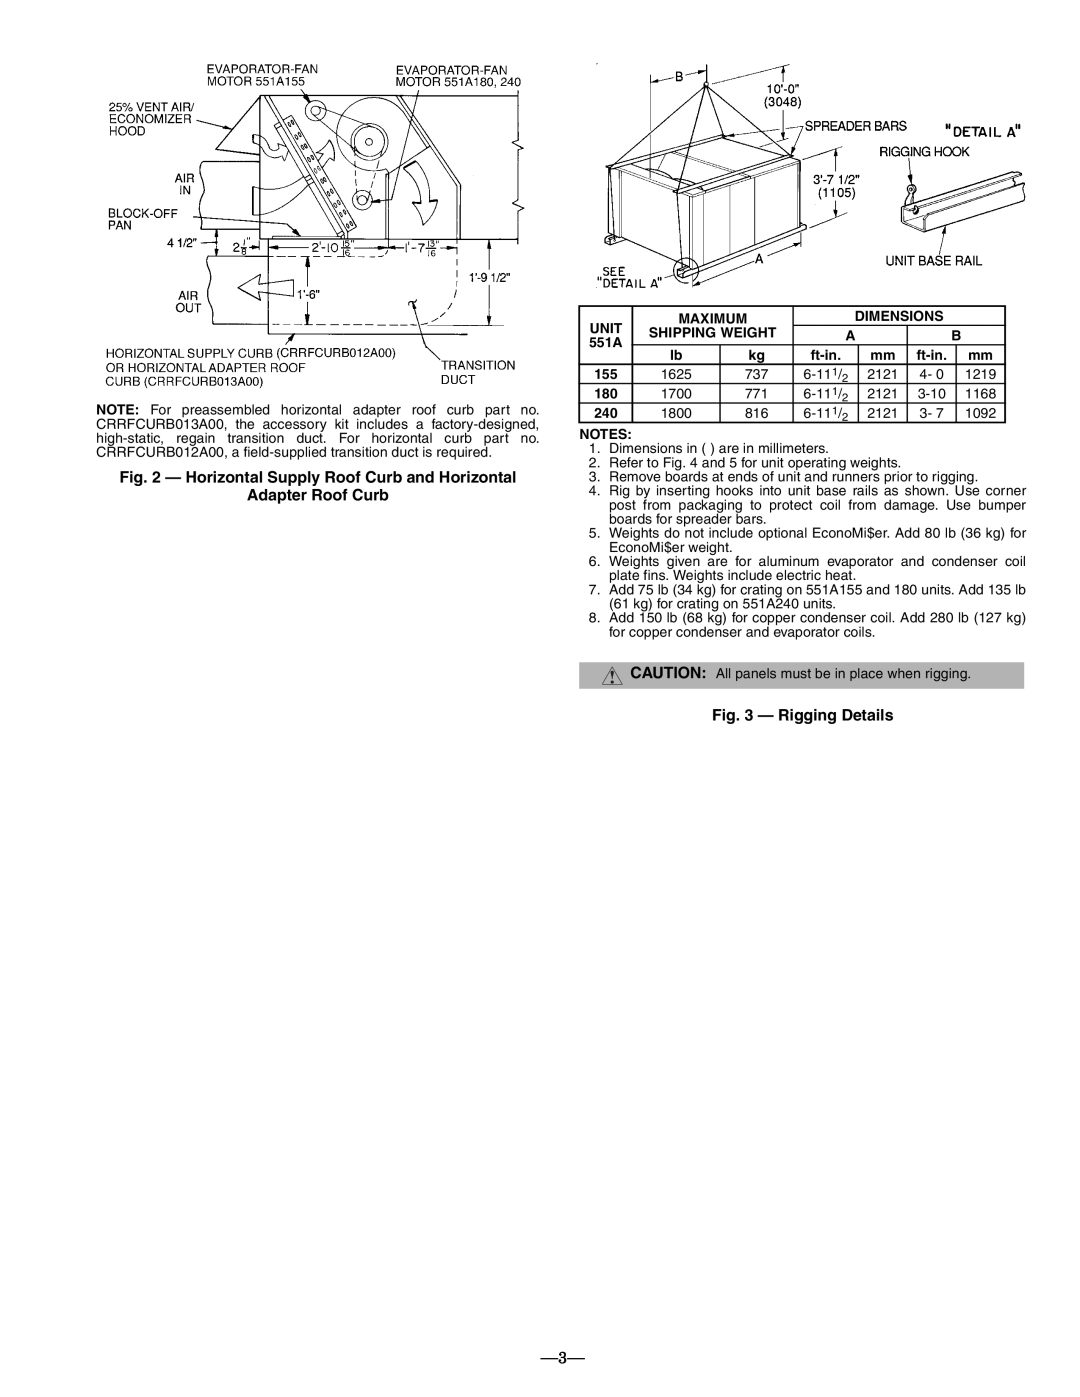 Bryant 551A operation manual Adapter Roof Curb, Rigging Details 